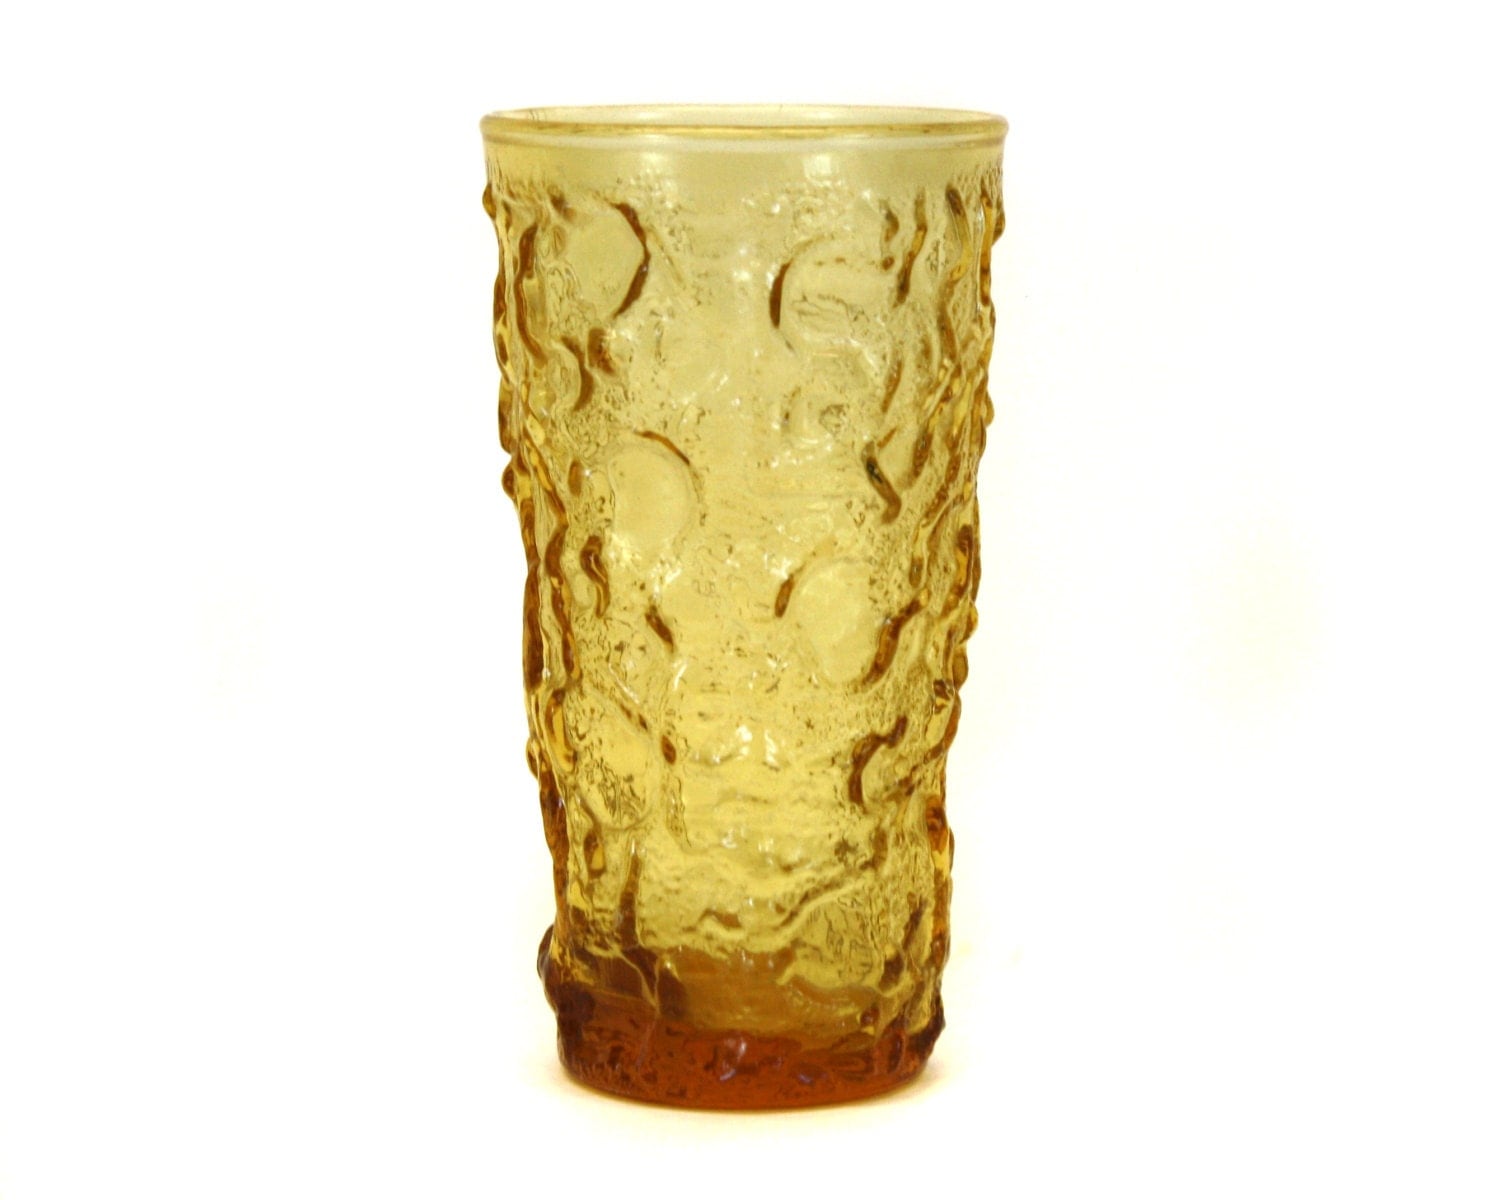 Vintage Amber Drinking Glass Wlava Looking Texture E2048 4519